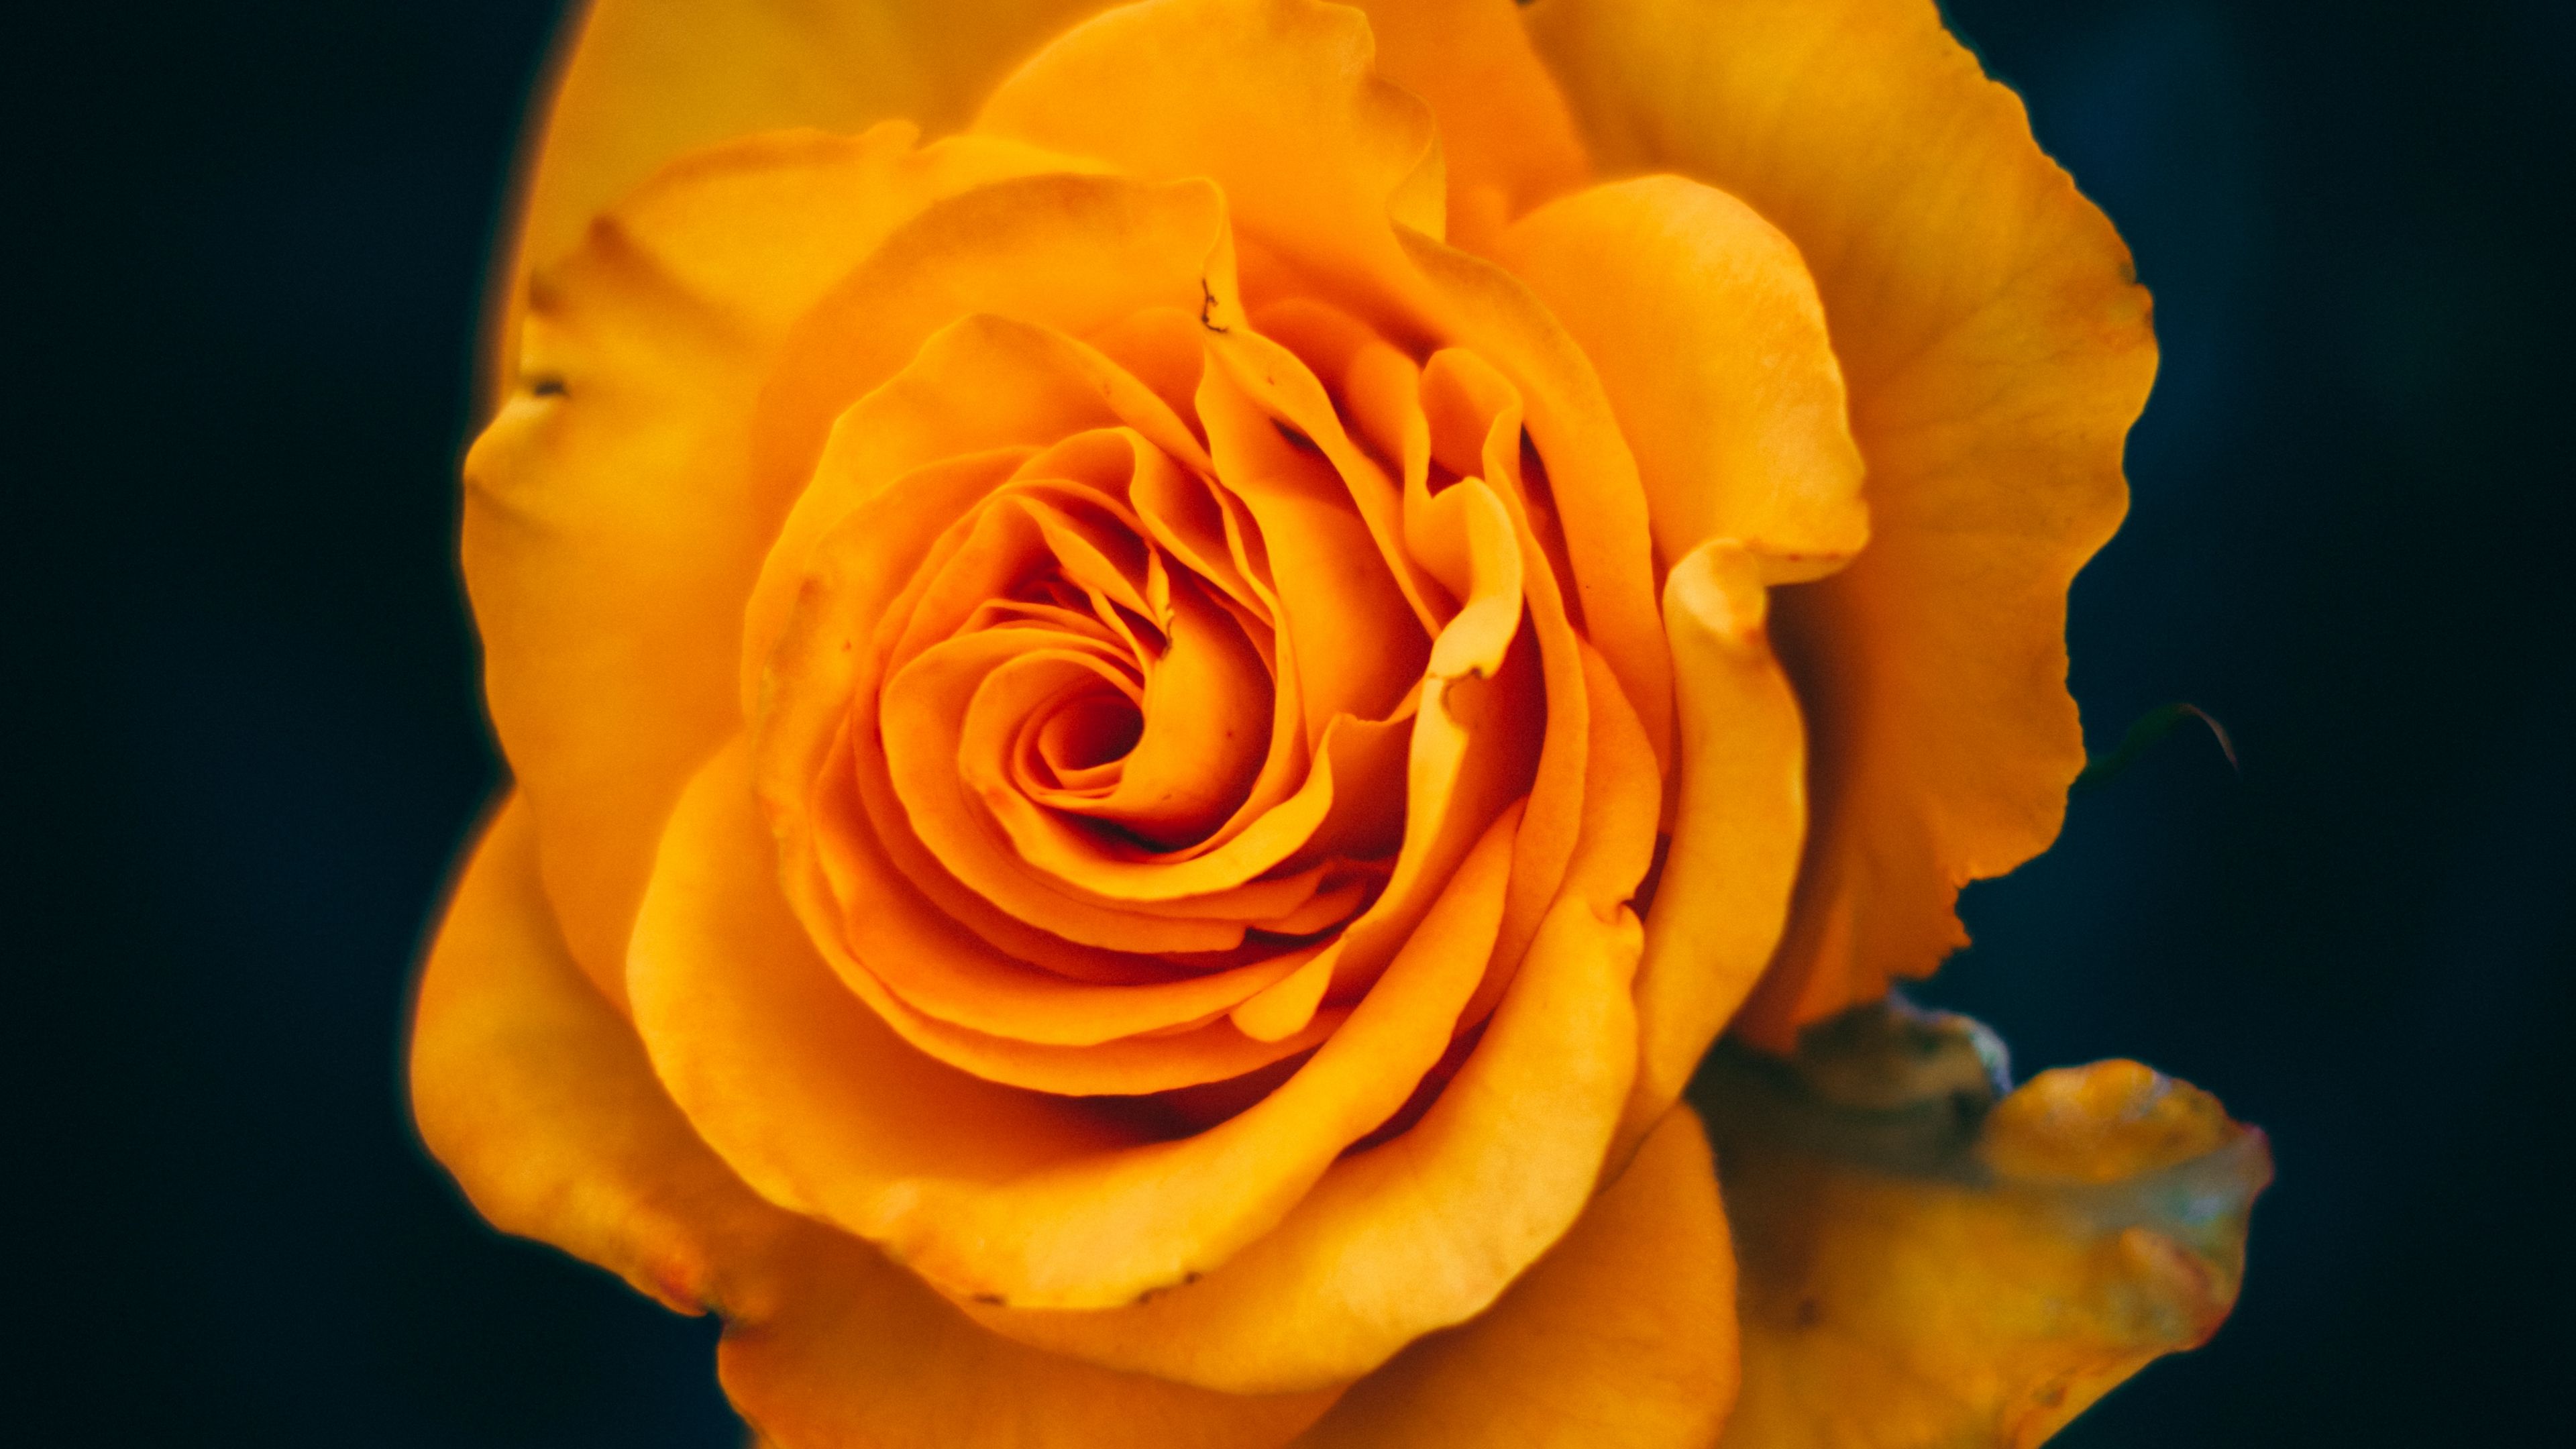 Rose 4K wallpapers for your desktop or mobile screen free and easy to